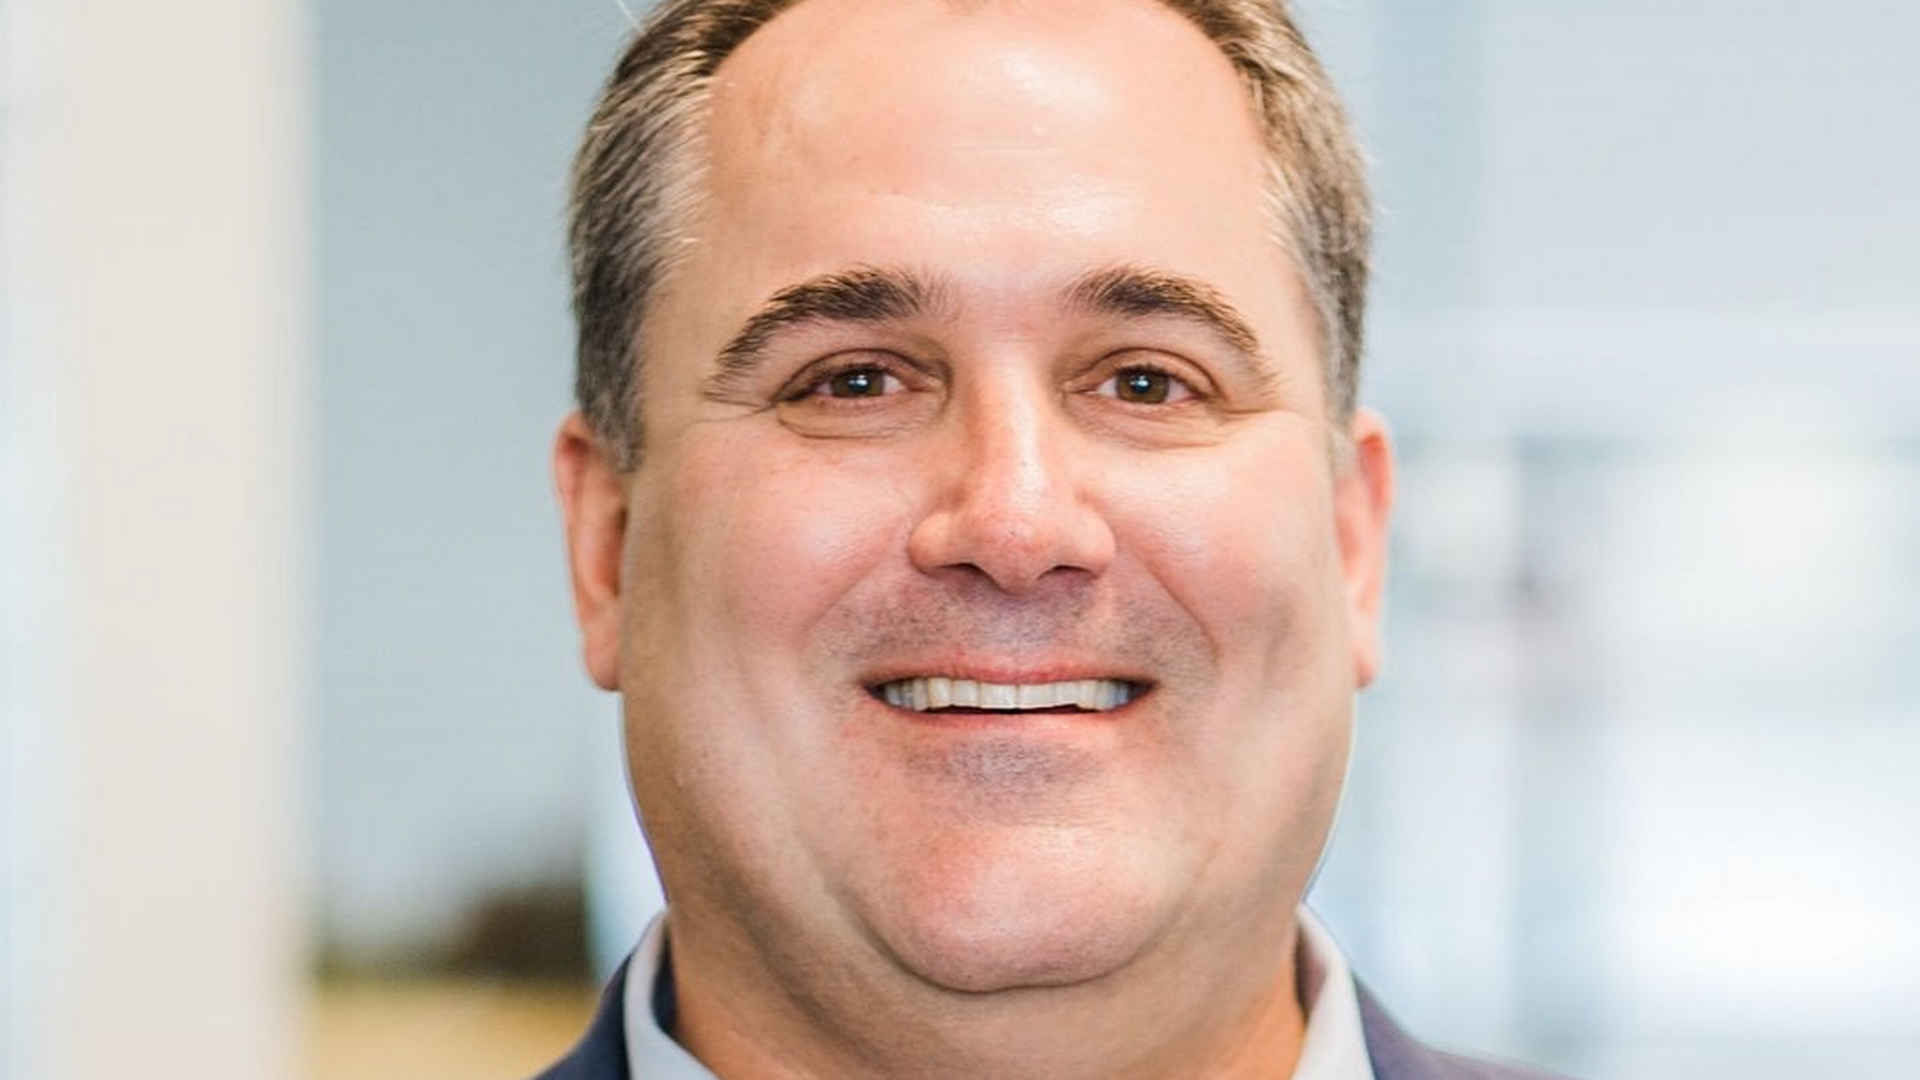 Joe Kramek, who from August 1, 2024 will be the president and CEO of the Shipping Association, first became acquainted with the maritime sector when he was an officer in the US Coast Guard 28 years ago.